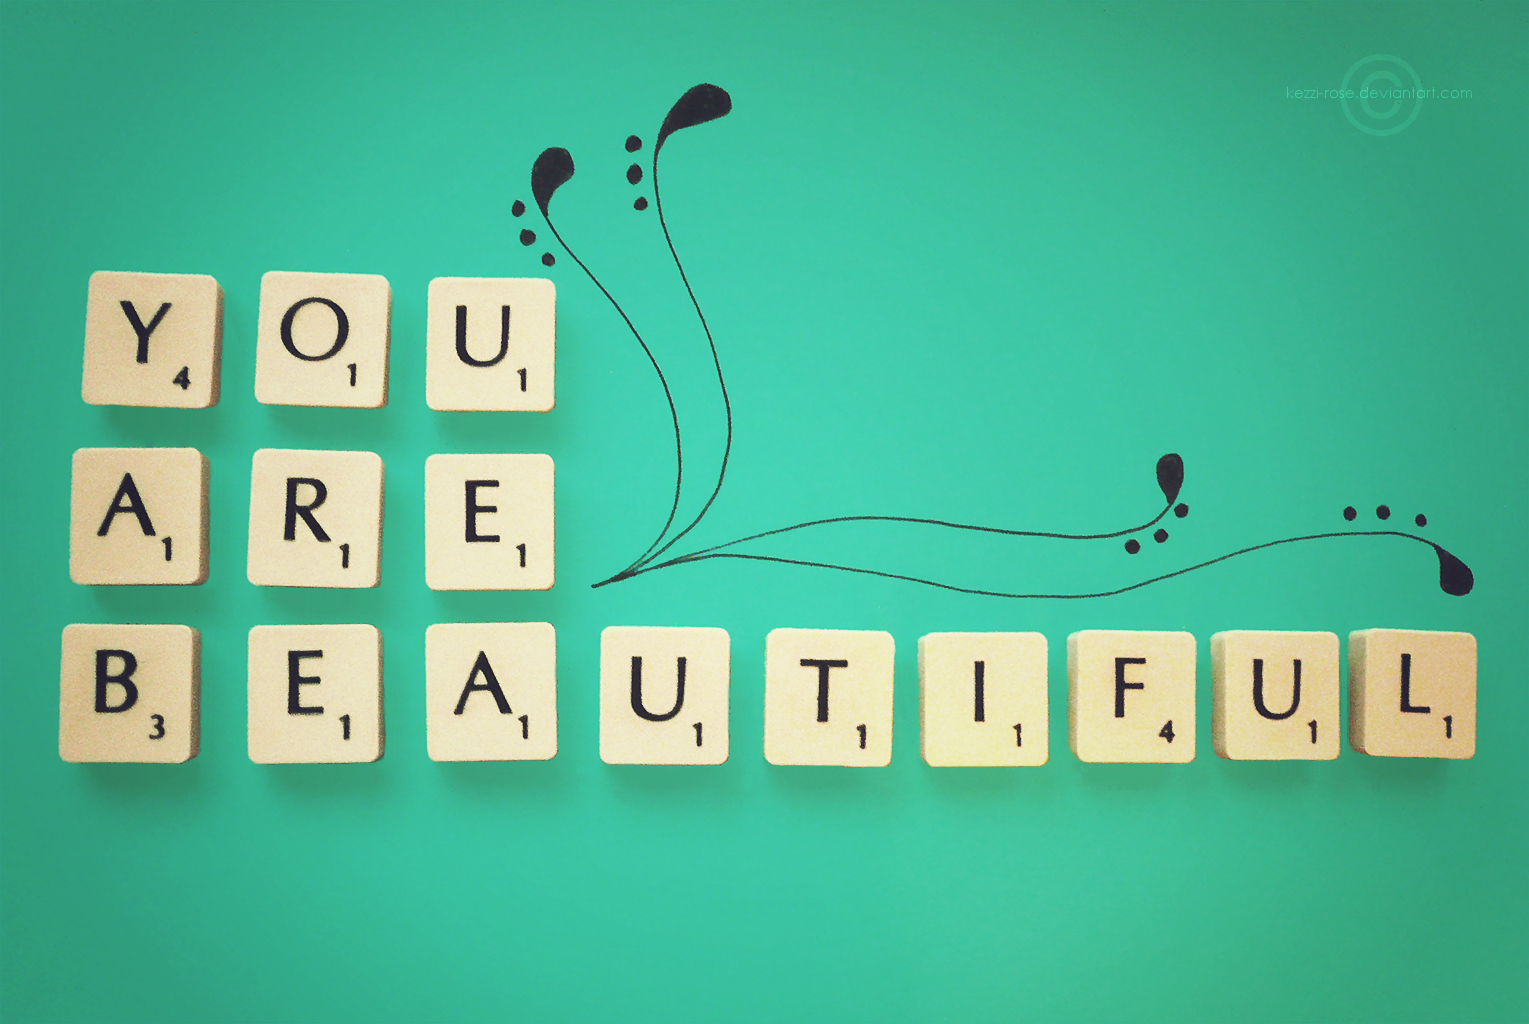 Are you hearing anything. You are. You are picture. You are beautiful. You are q.